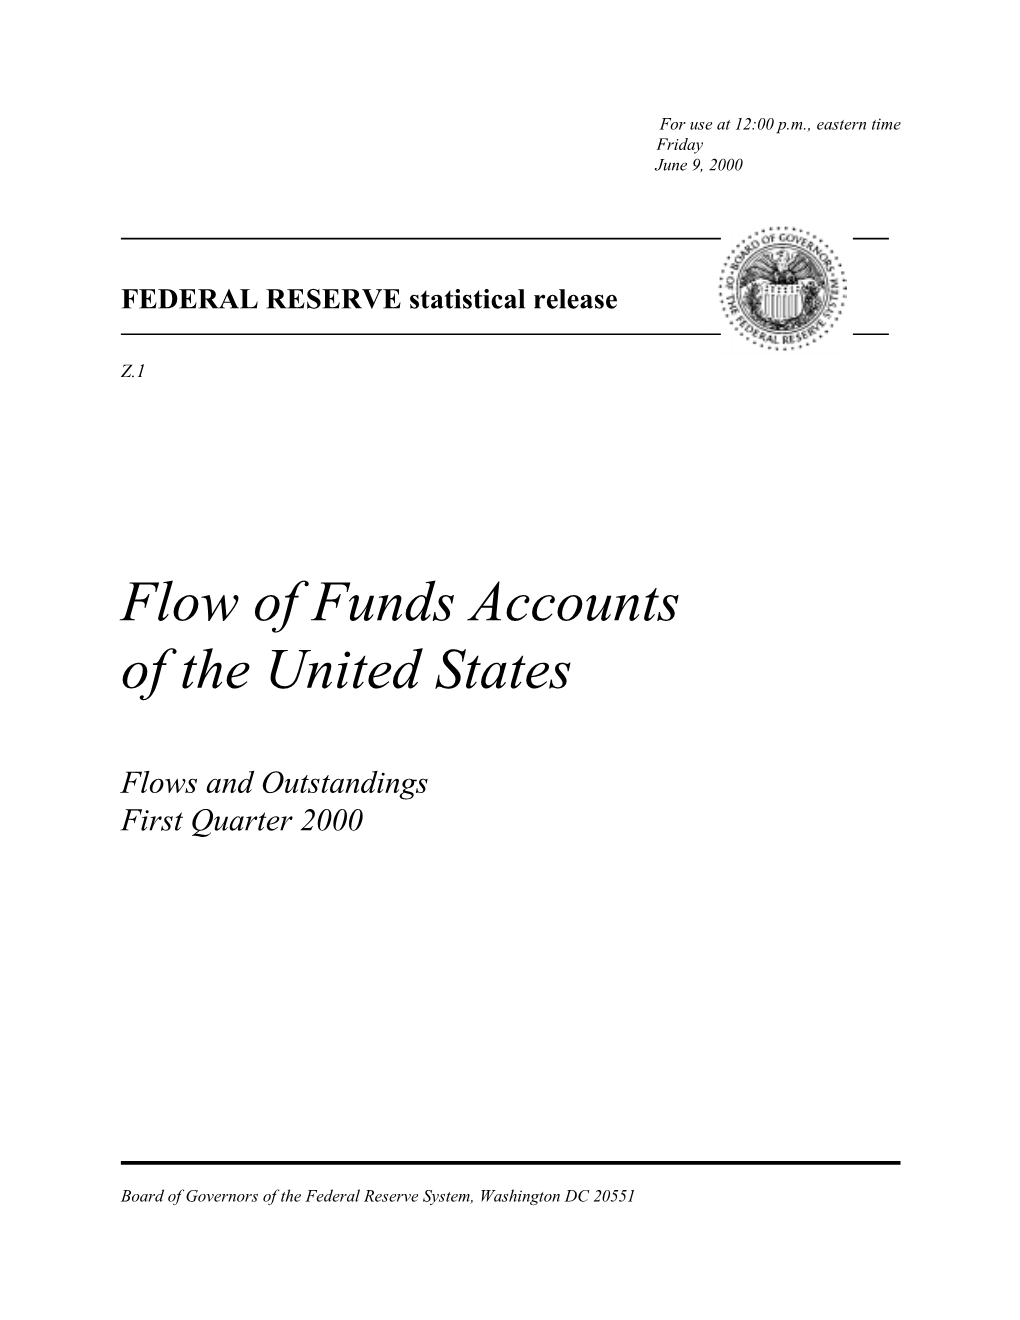 Flow of Funds Accounts of the United States